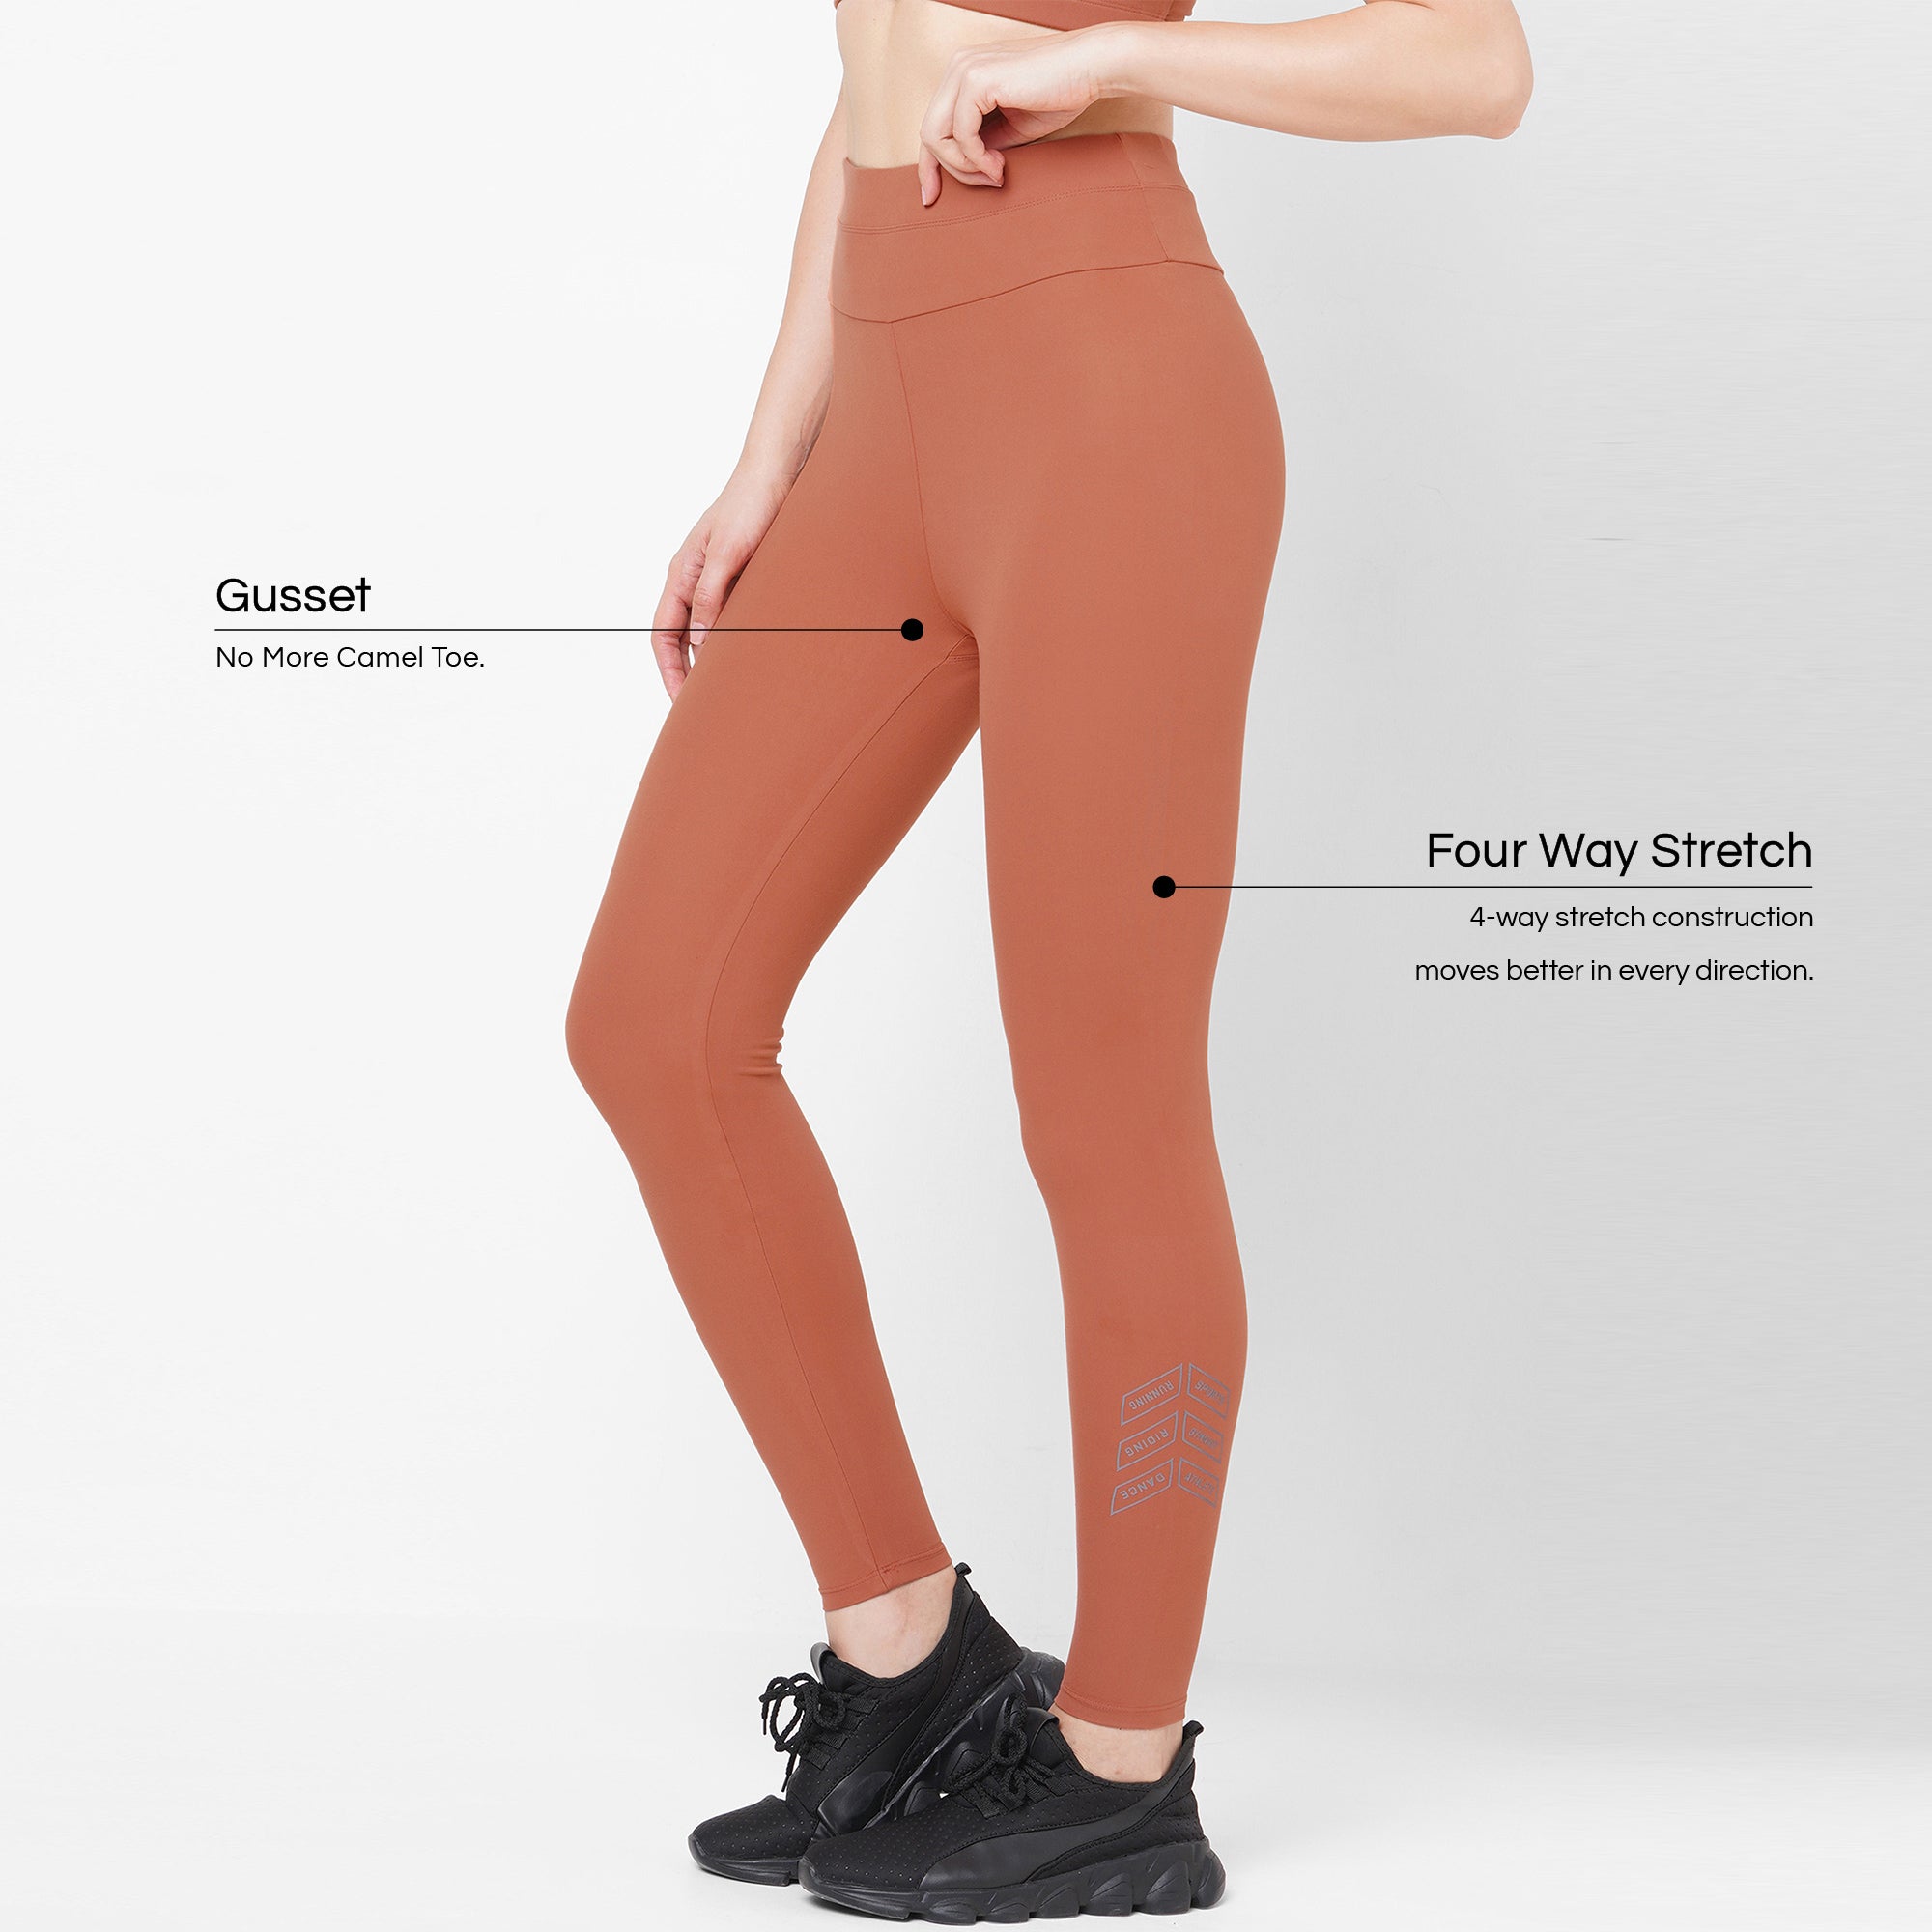 JUST-DRY Cocoa Brown 7/8 High Waist Running Tights for Women – Laasa Sports